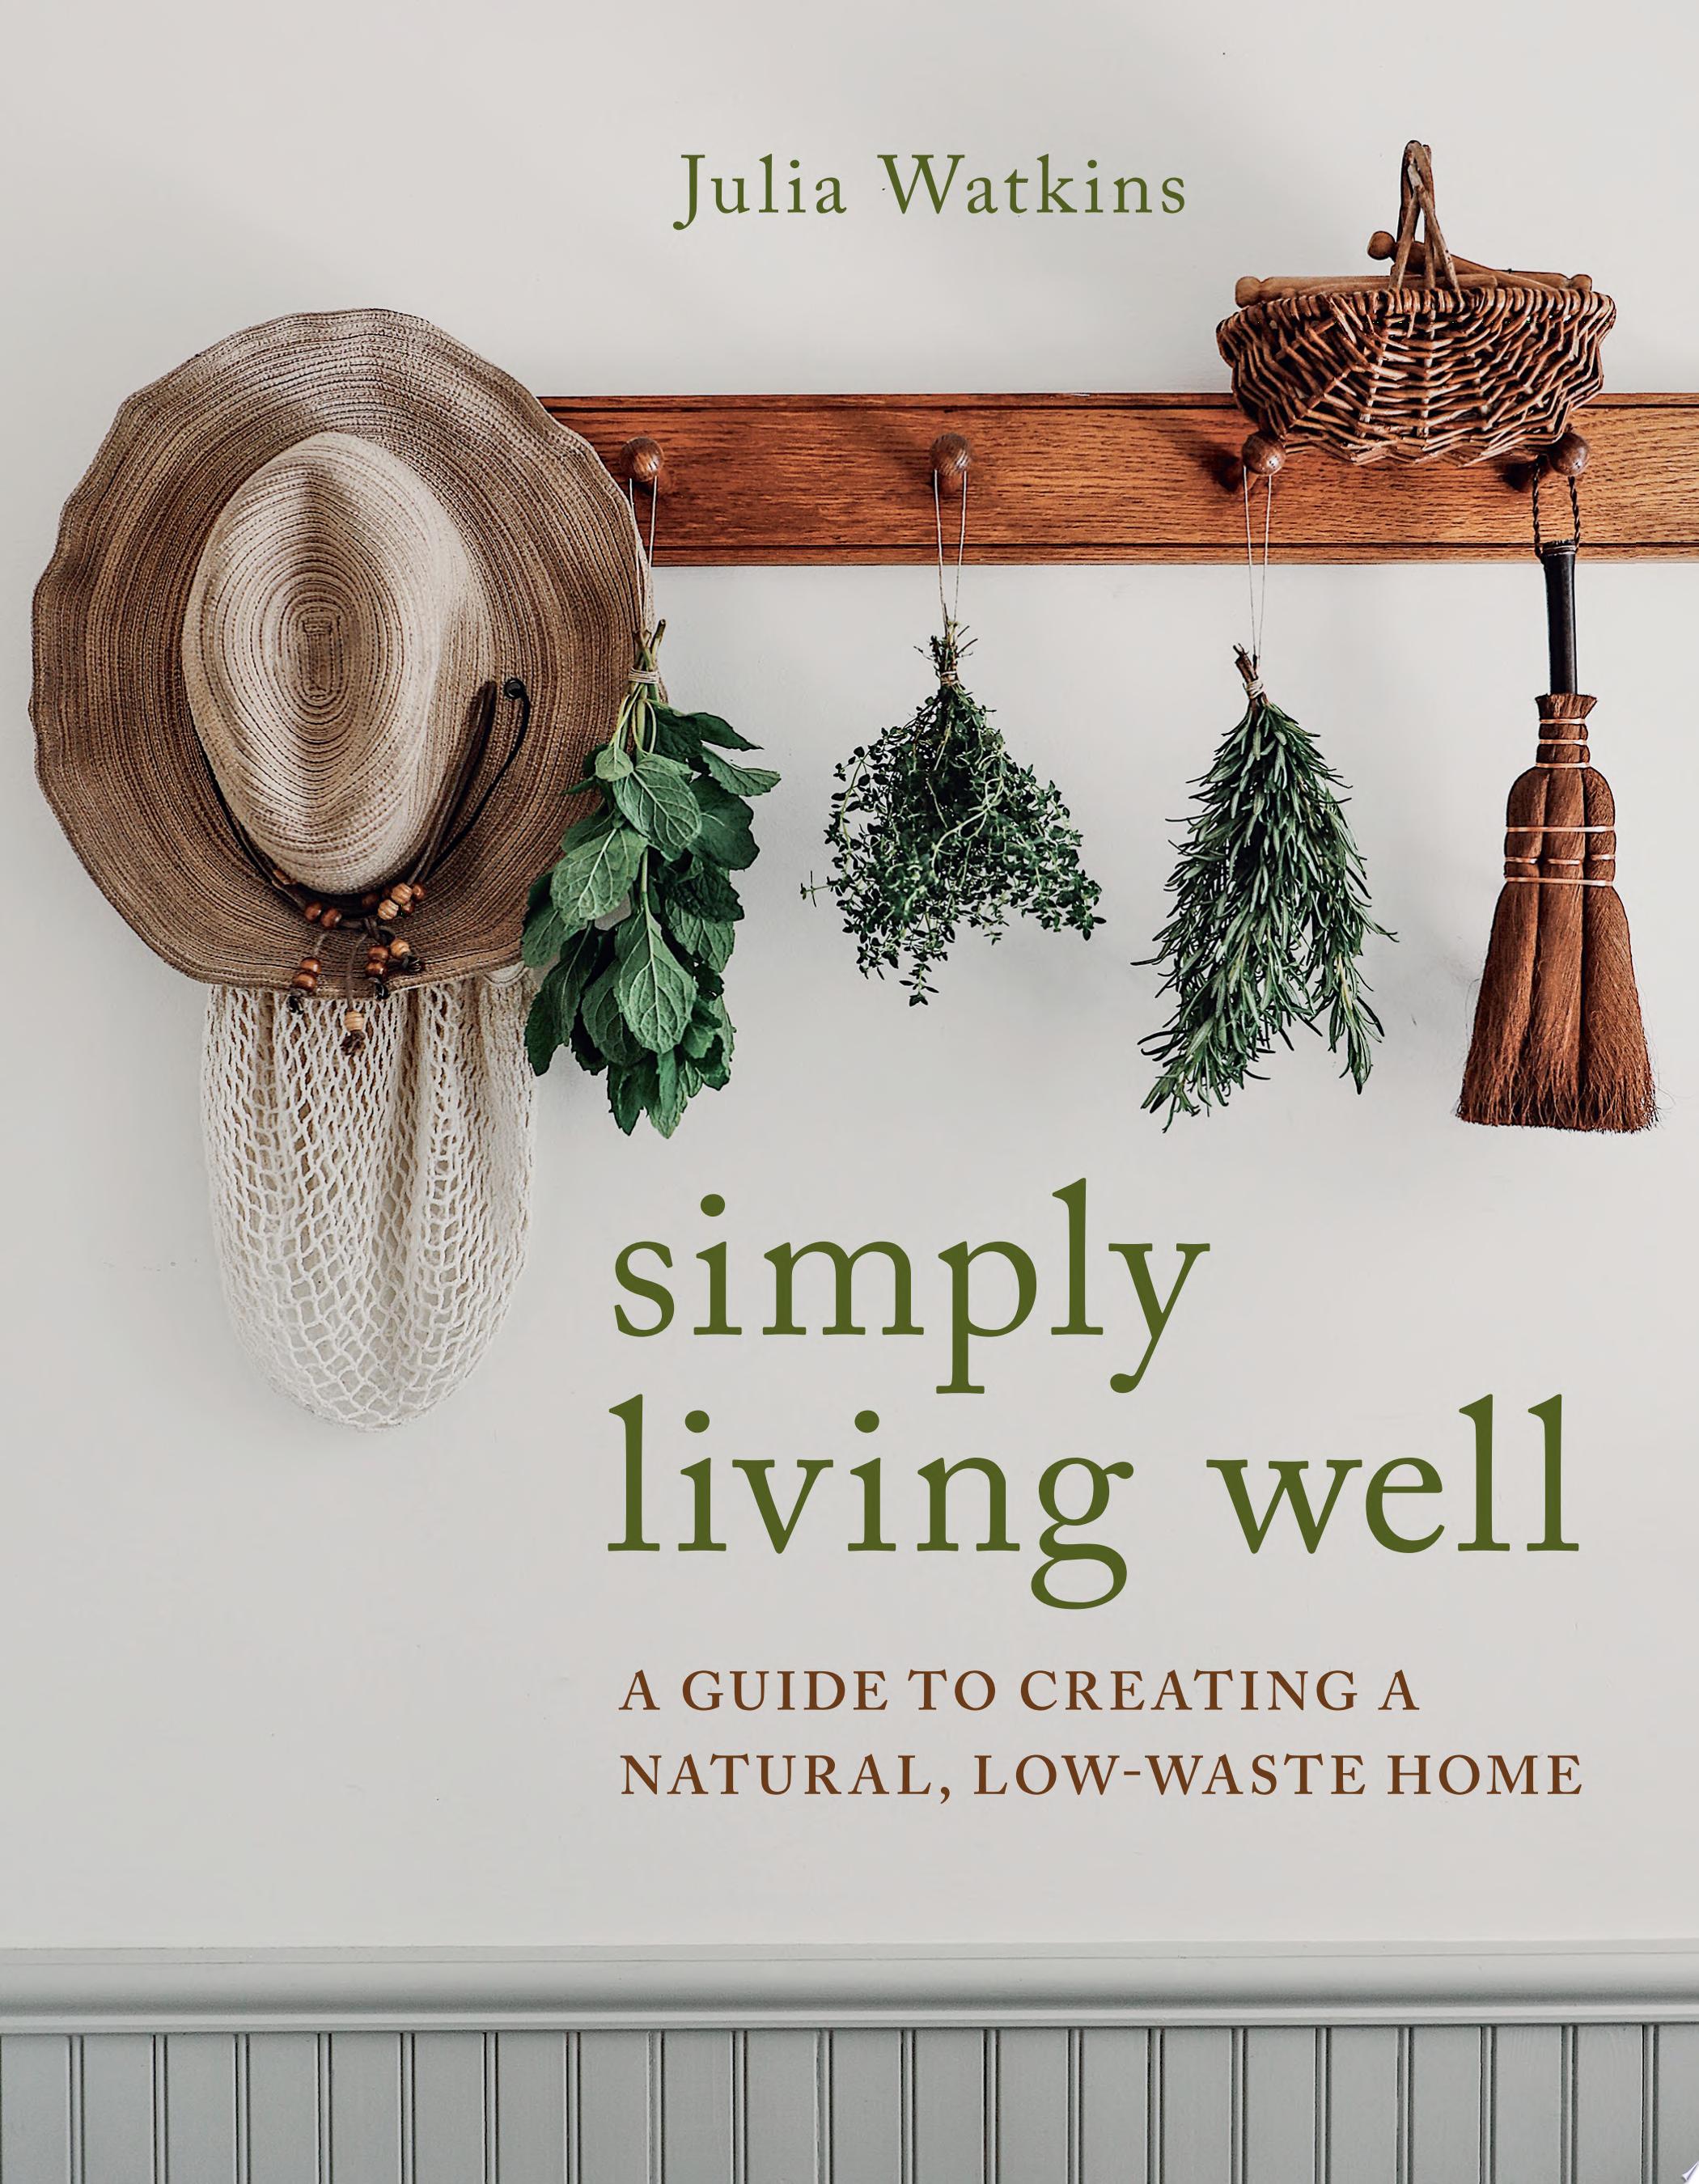 Image for "Simply Living Well"